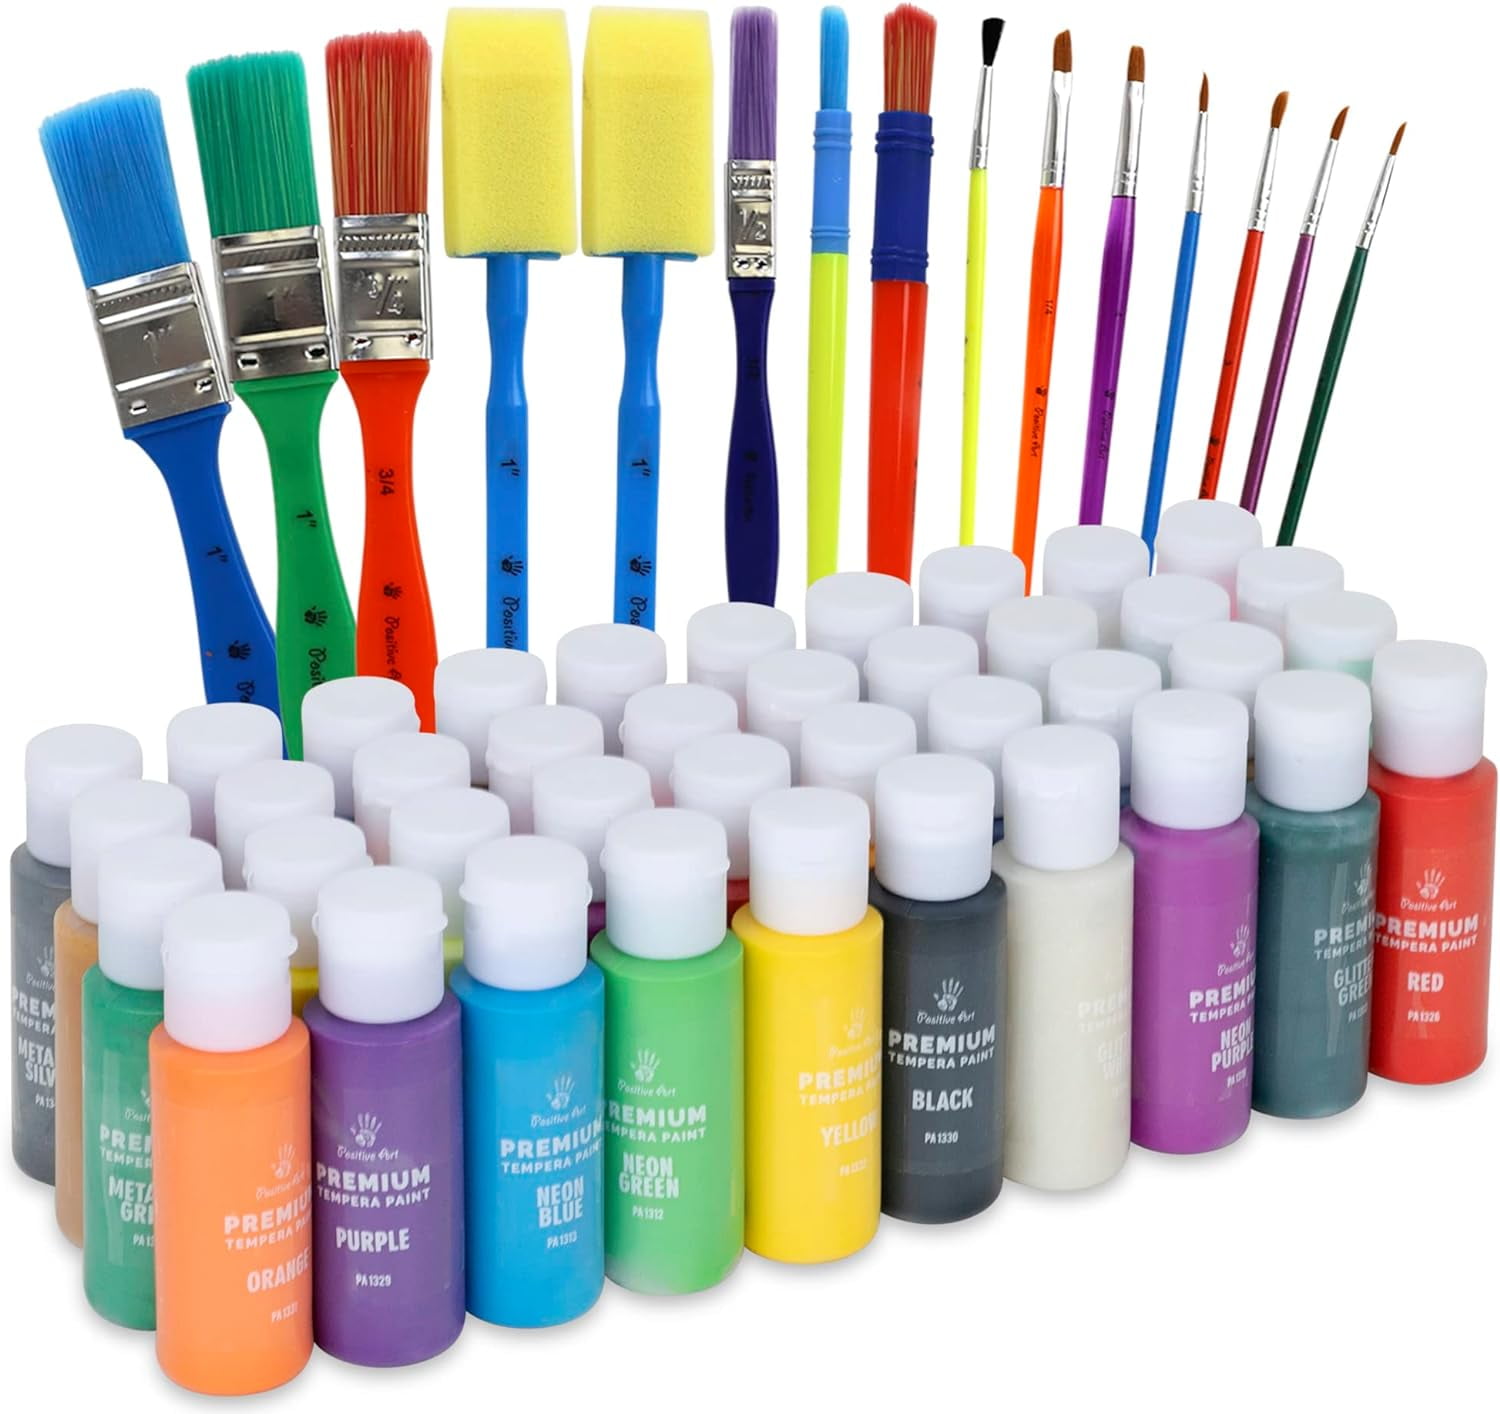 finenolo Metallic Acrylic Paint Set of 24 Colors (2oz/60 ml) Bottles, Art  Craft Paints with 3 Brushes, Fade-proof & Non-Toxic Paint Supplies for